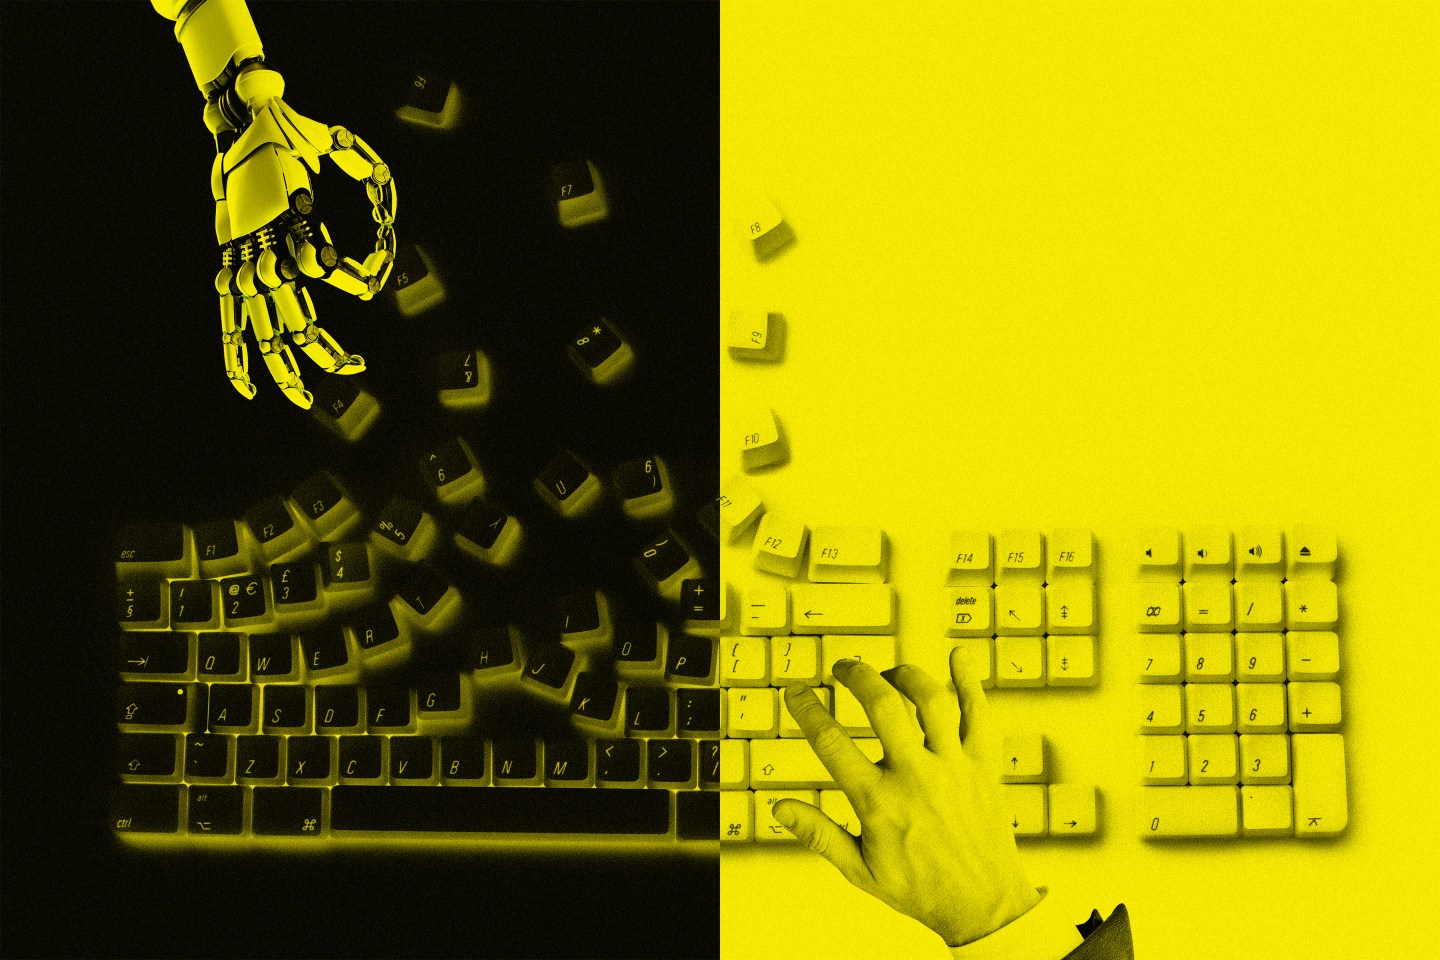 Photo illustration of an exploding keyboard with a robot hand on one side and a man's hand on the other.